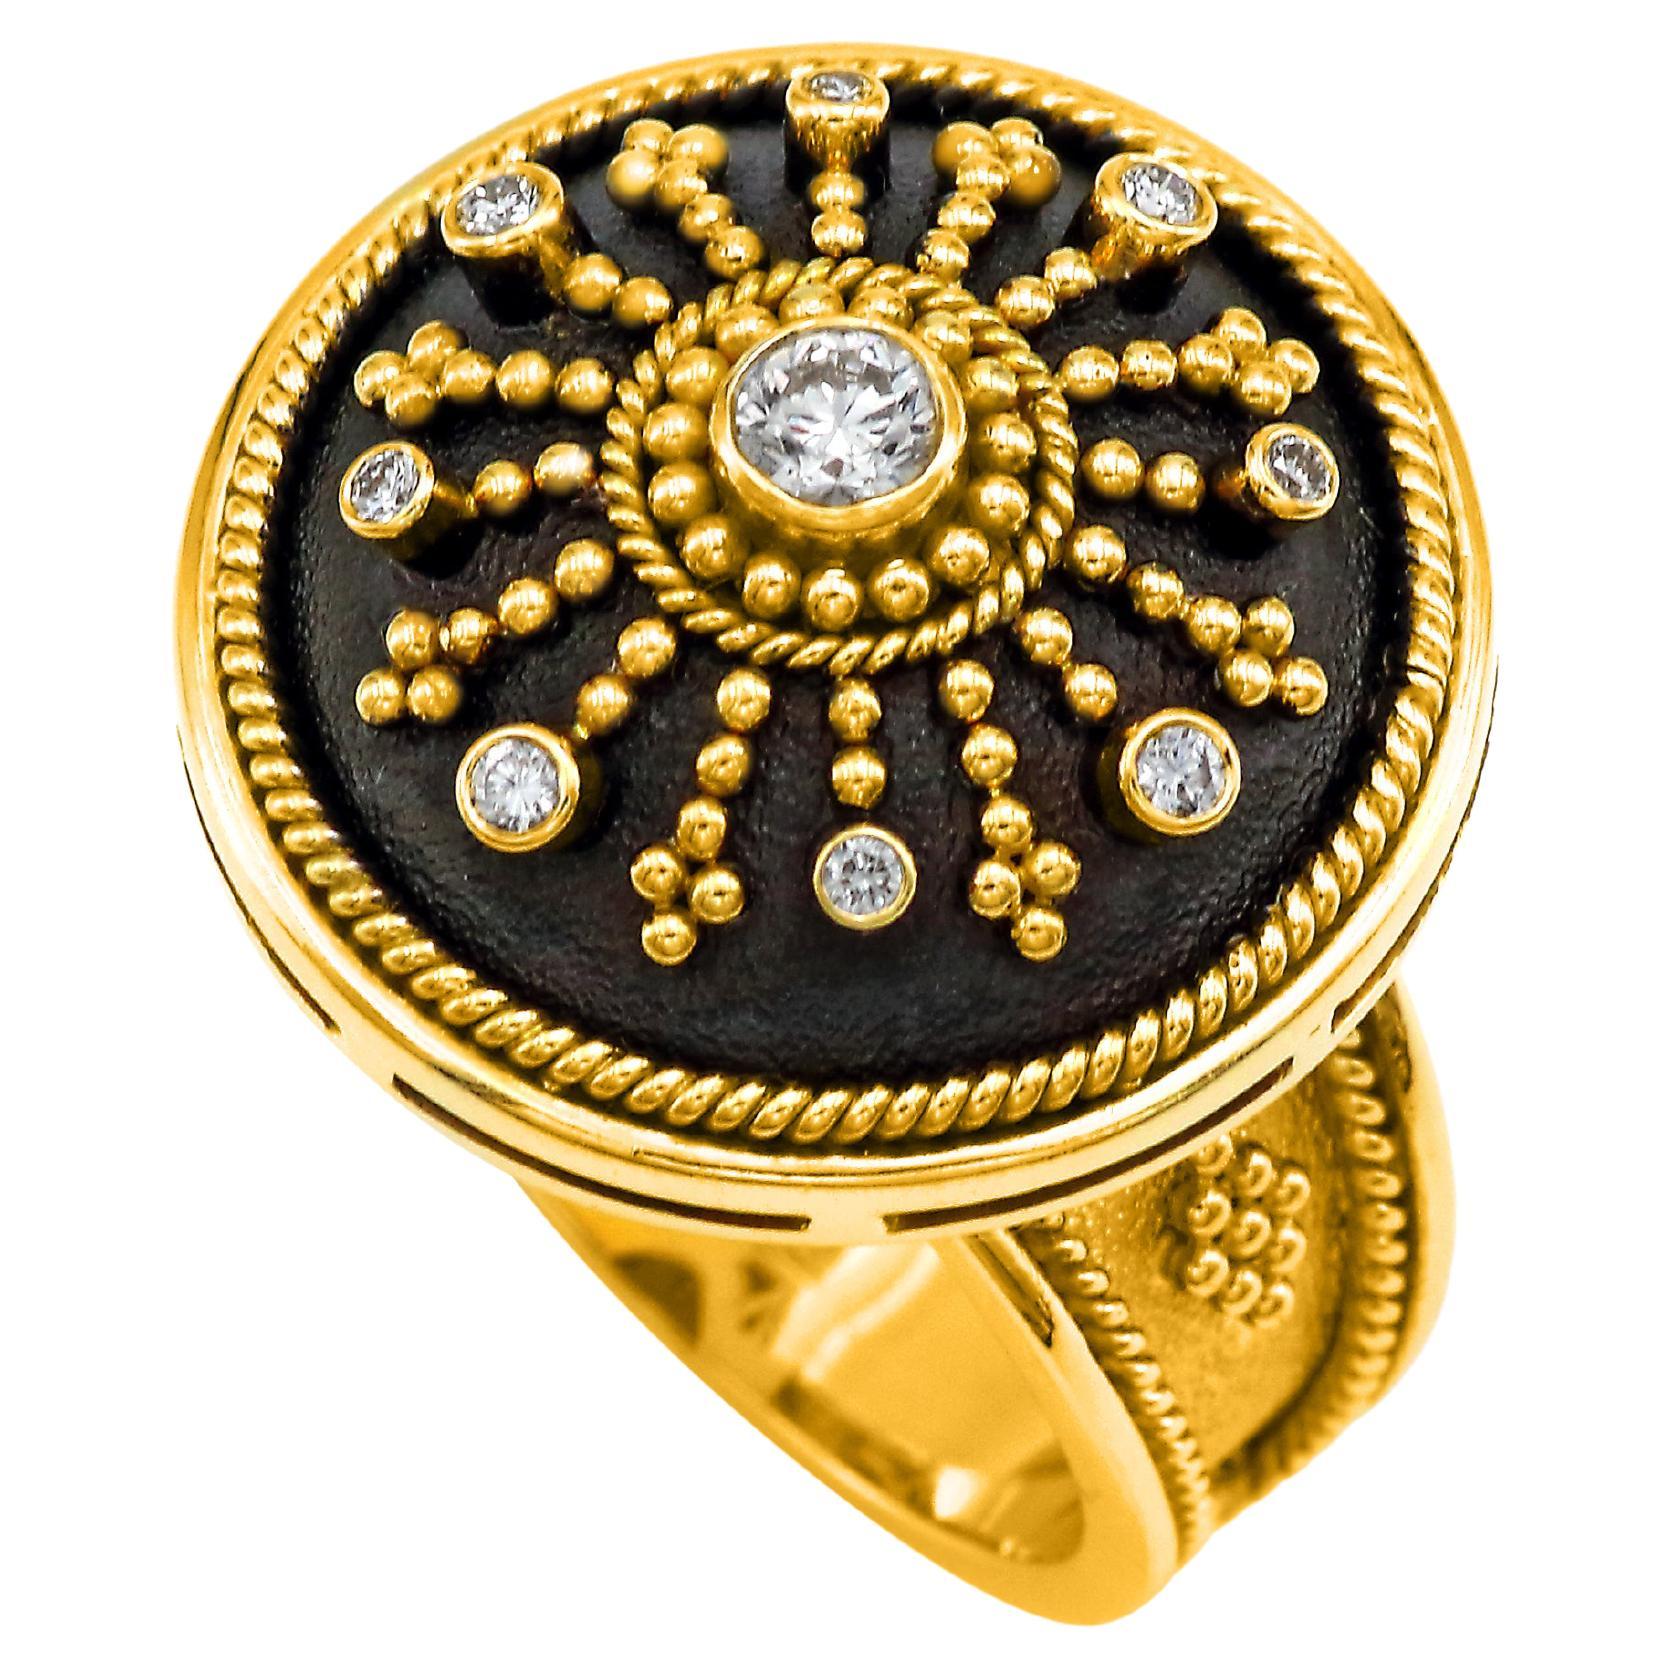 Dimos 18k Gold Byzantine Dome Ring with Brilliant Diamonds